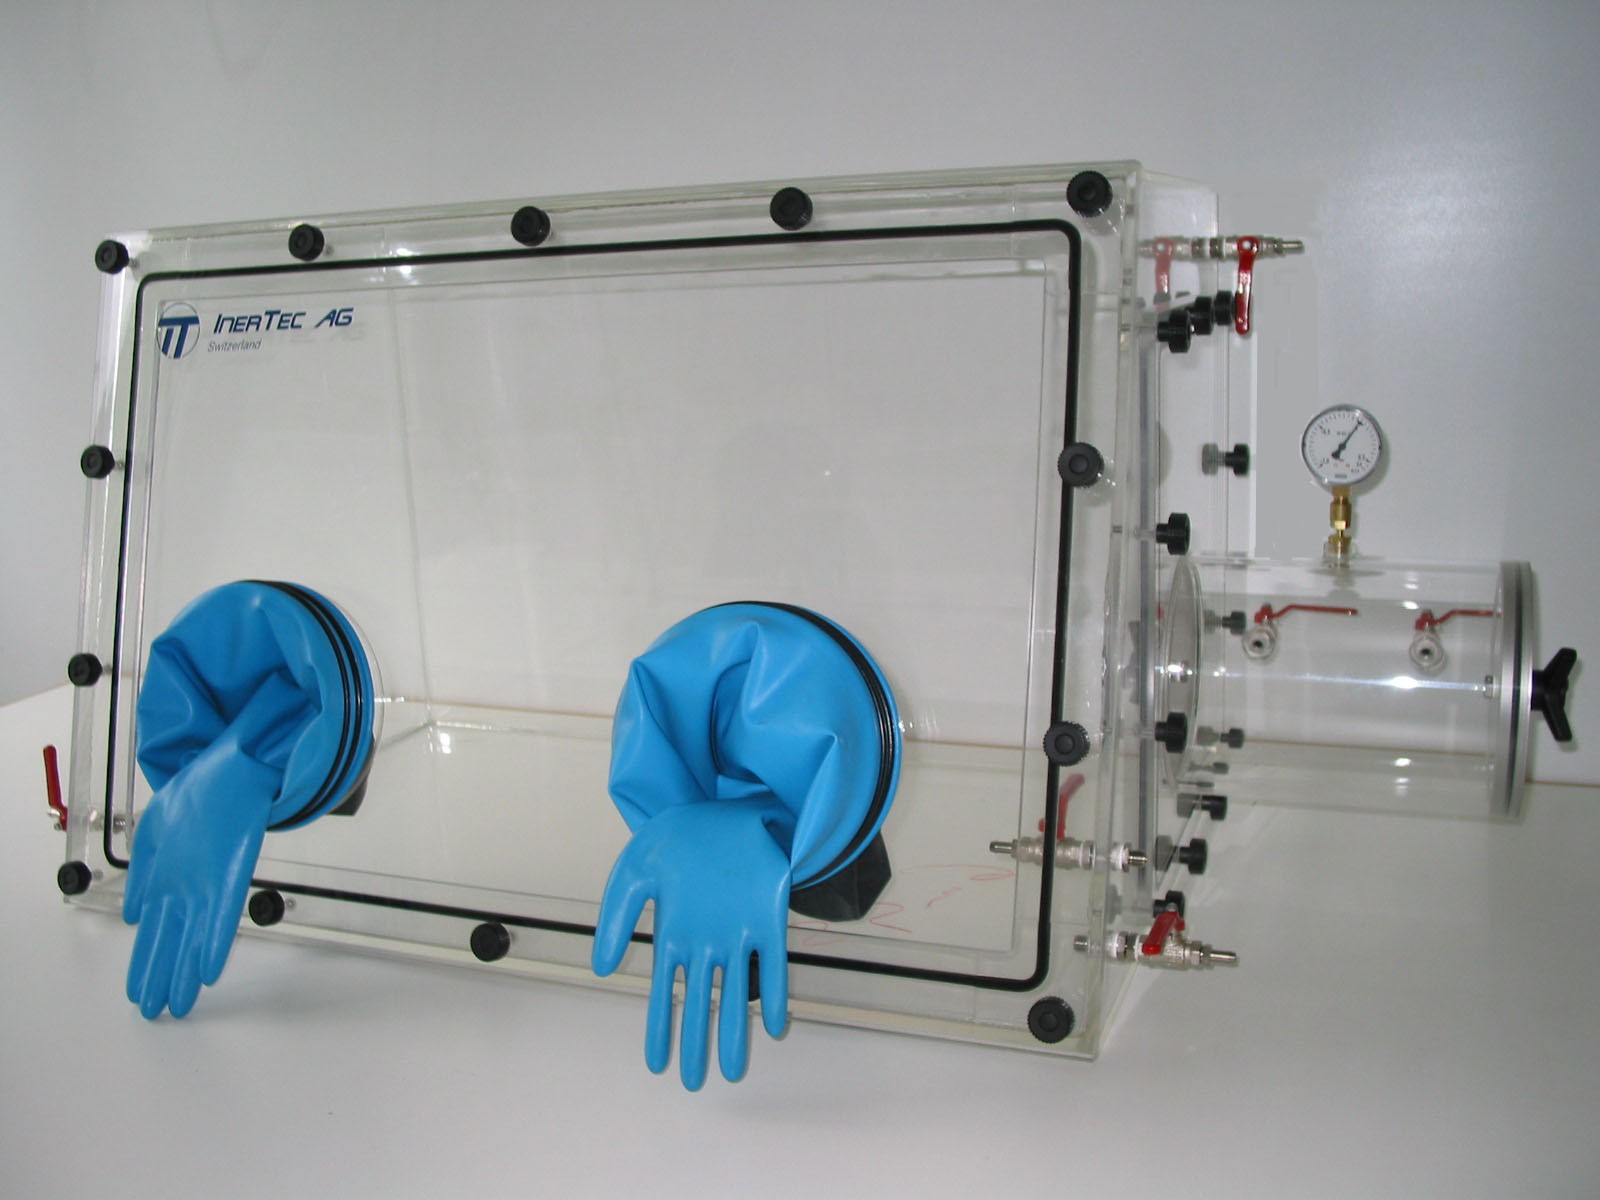 Glovebox made of acrylic&gt; Gas filling: automatic flushing with pressure control, front design: removable, side design: round vacuum lock, control: oxygen regulator